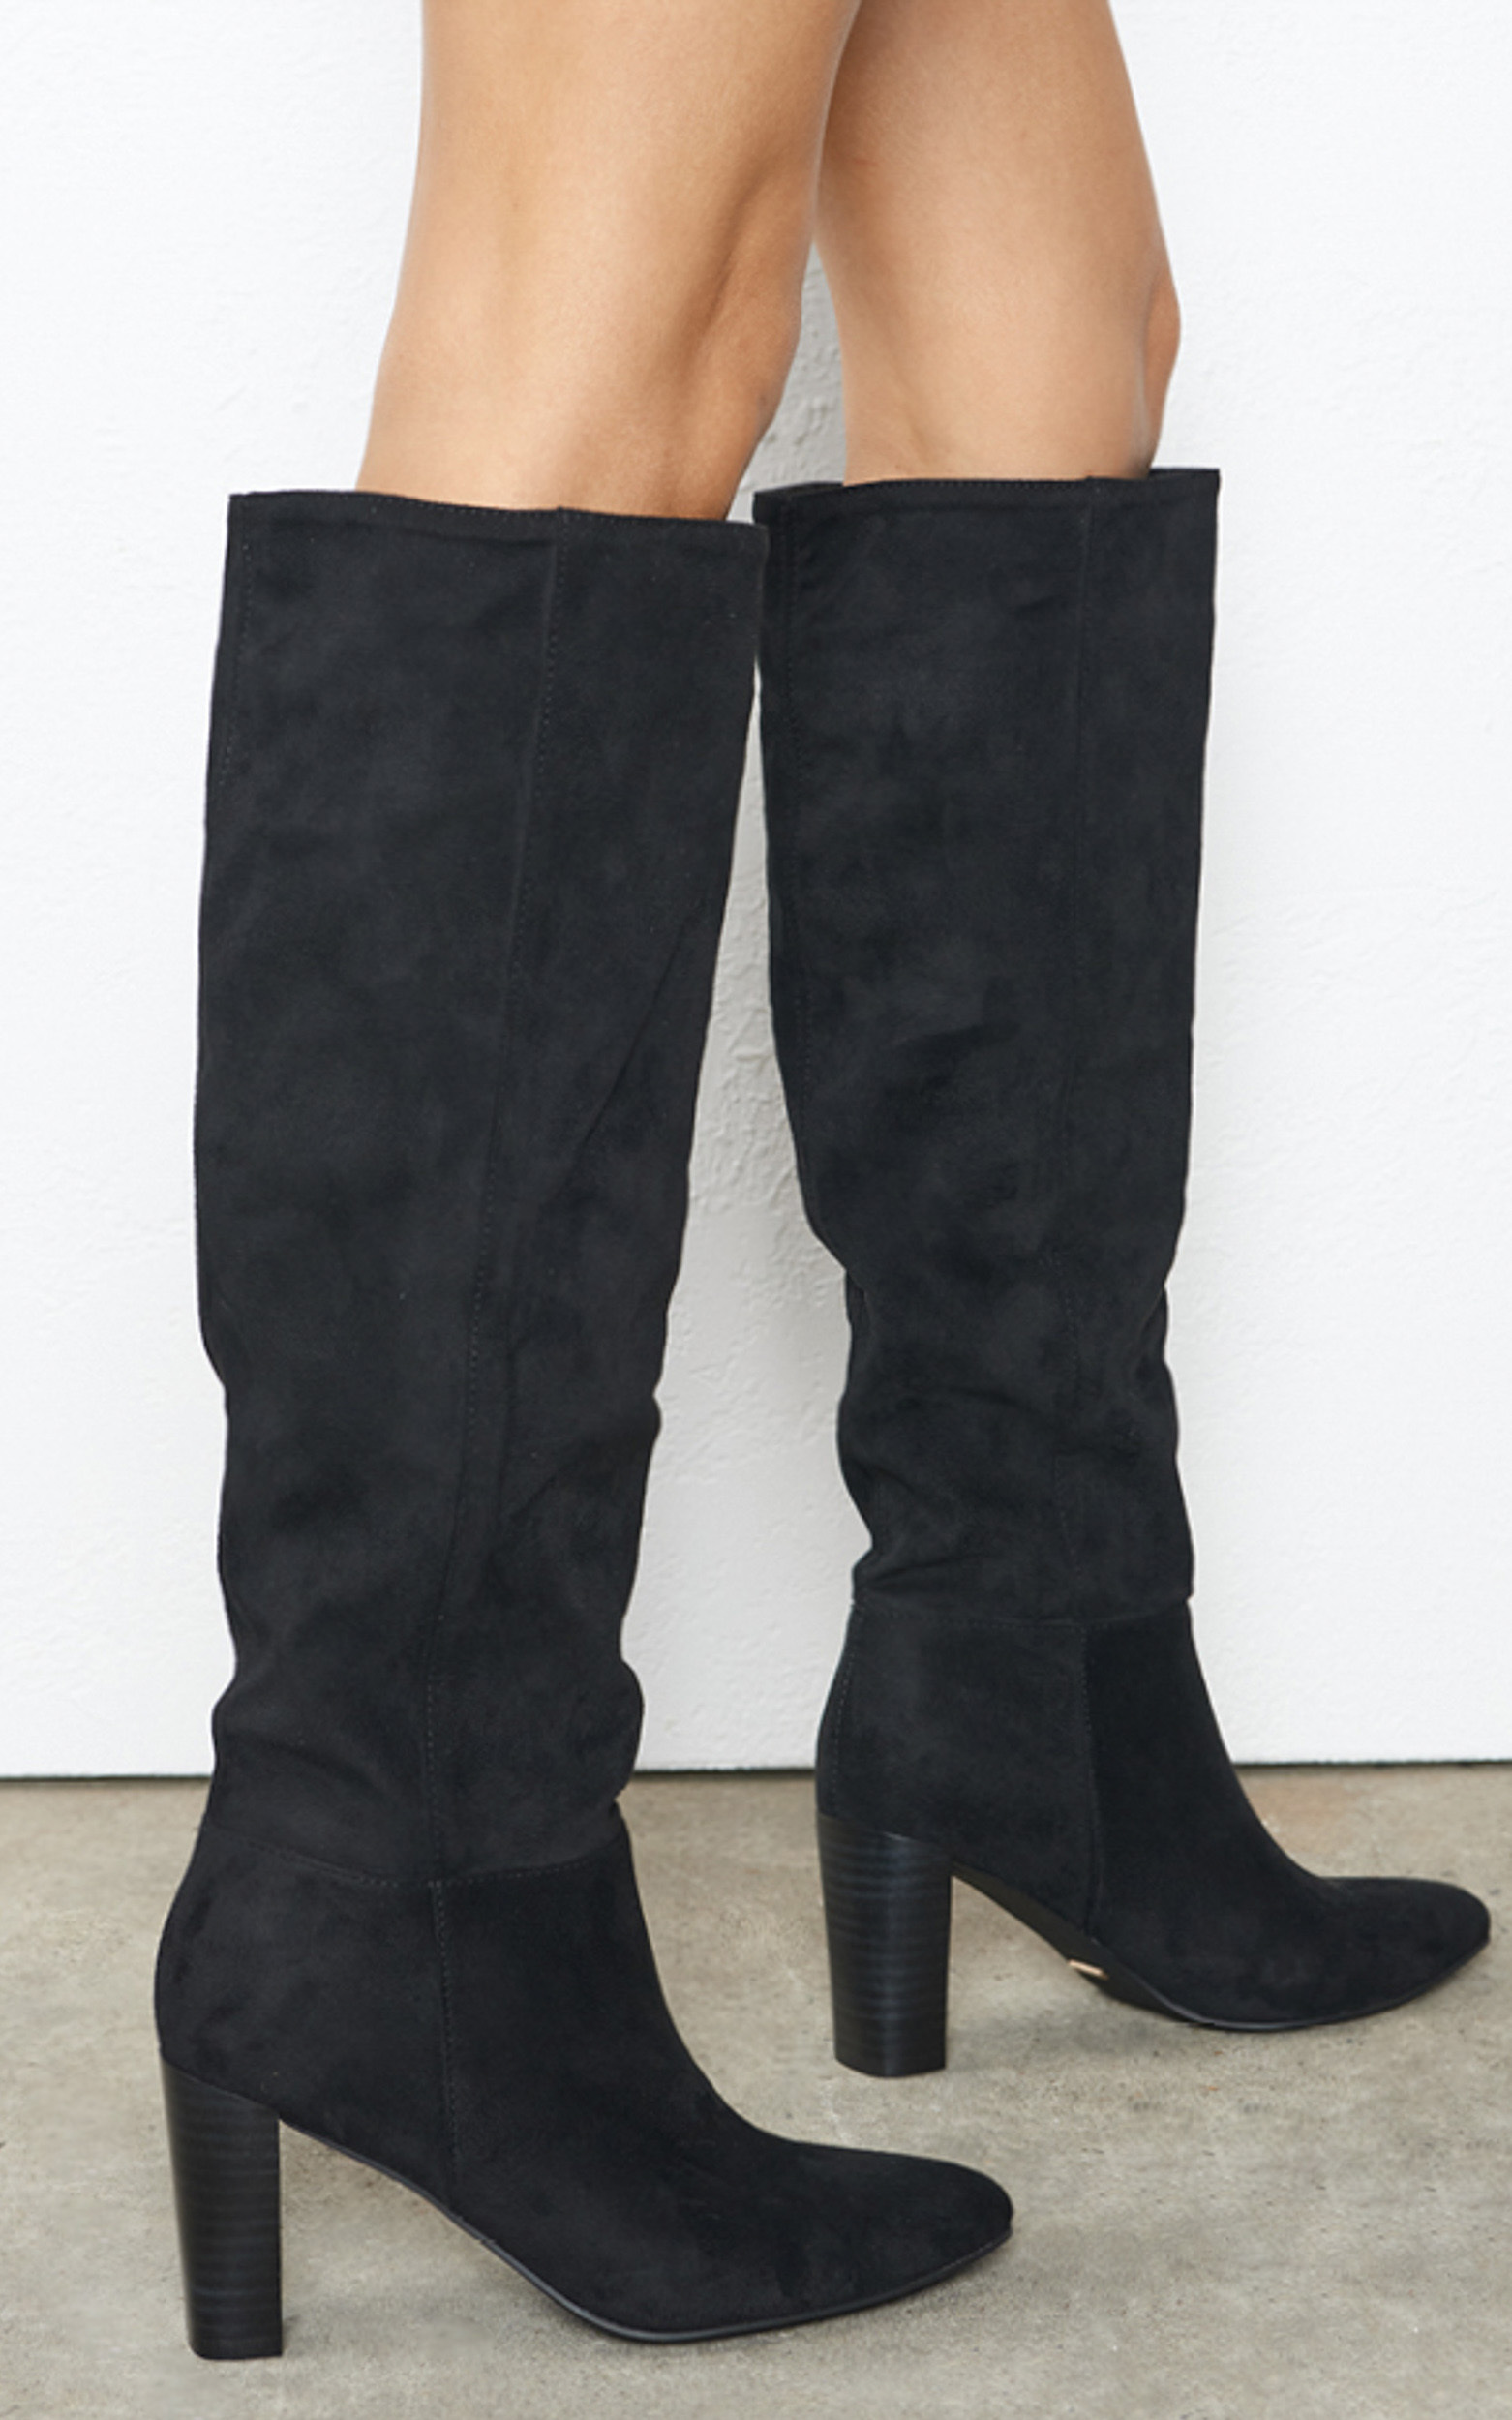 Billini - Gable Boots in Black Suede - 06, BLK1, hi-res image number null